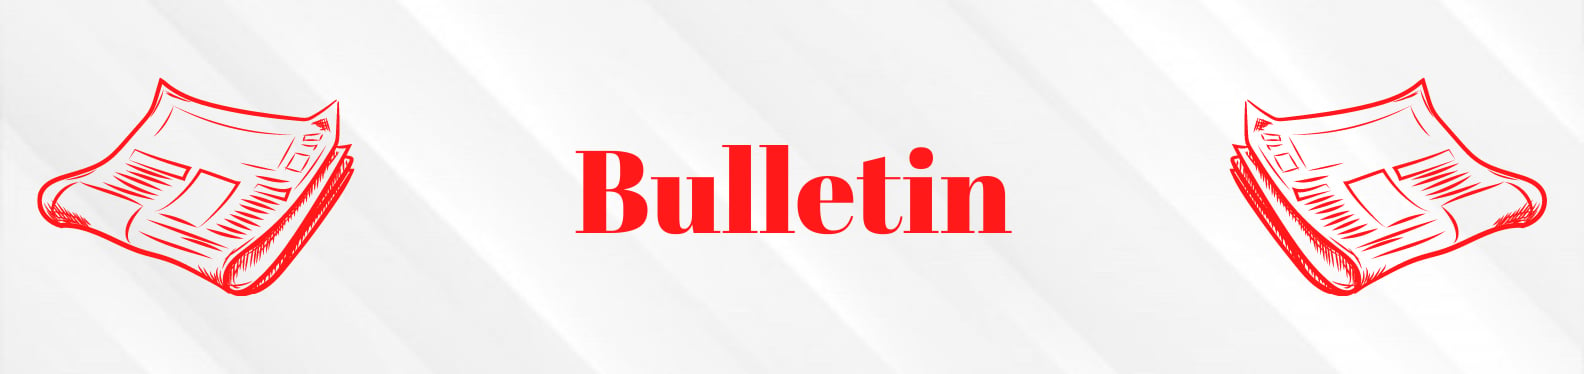 The word bulletin written in red bold writing, on a white background with a silhouette of a newspaper in red outline one on each side of the word.